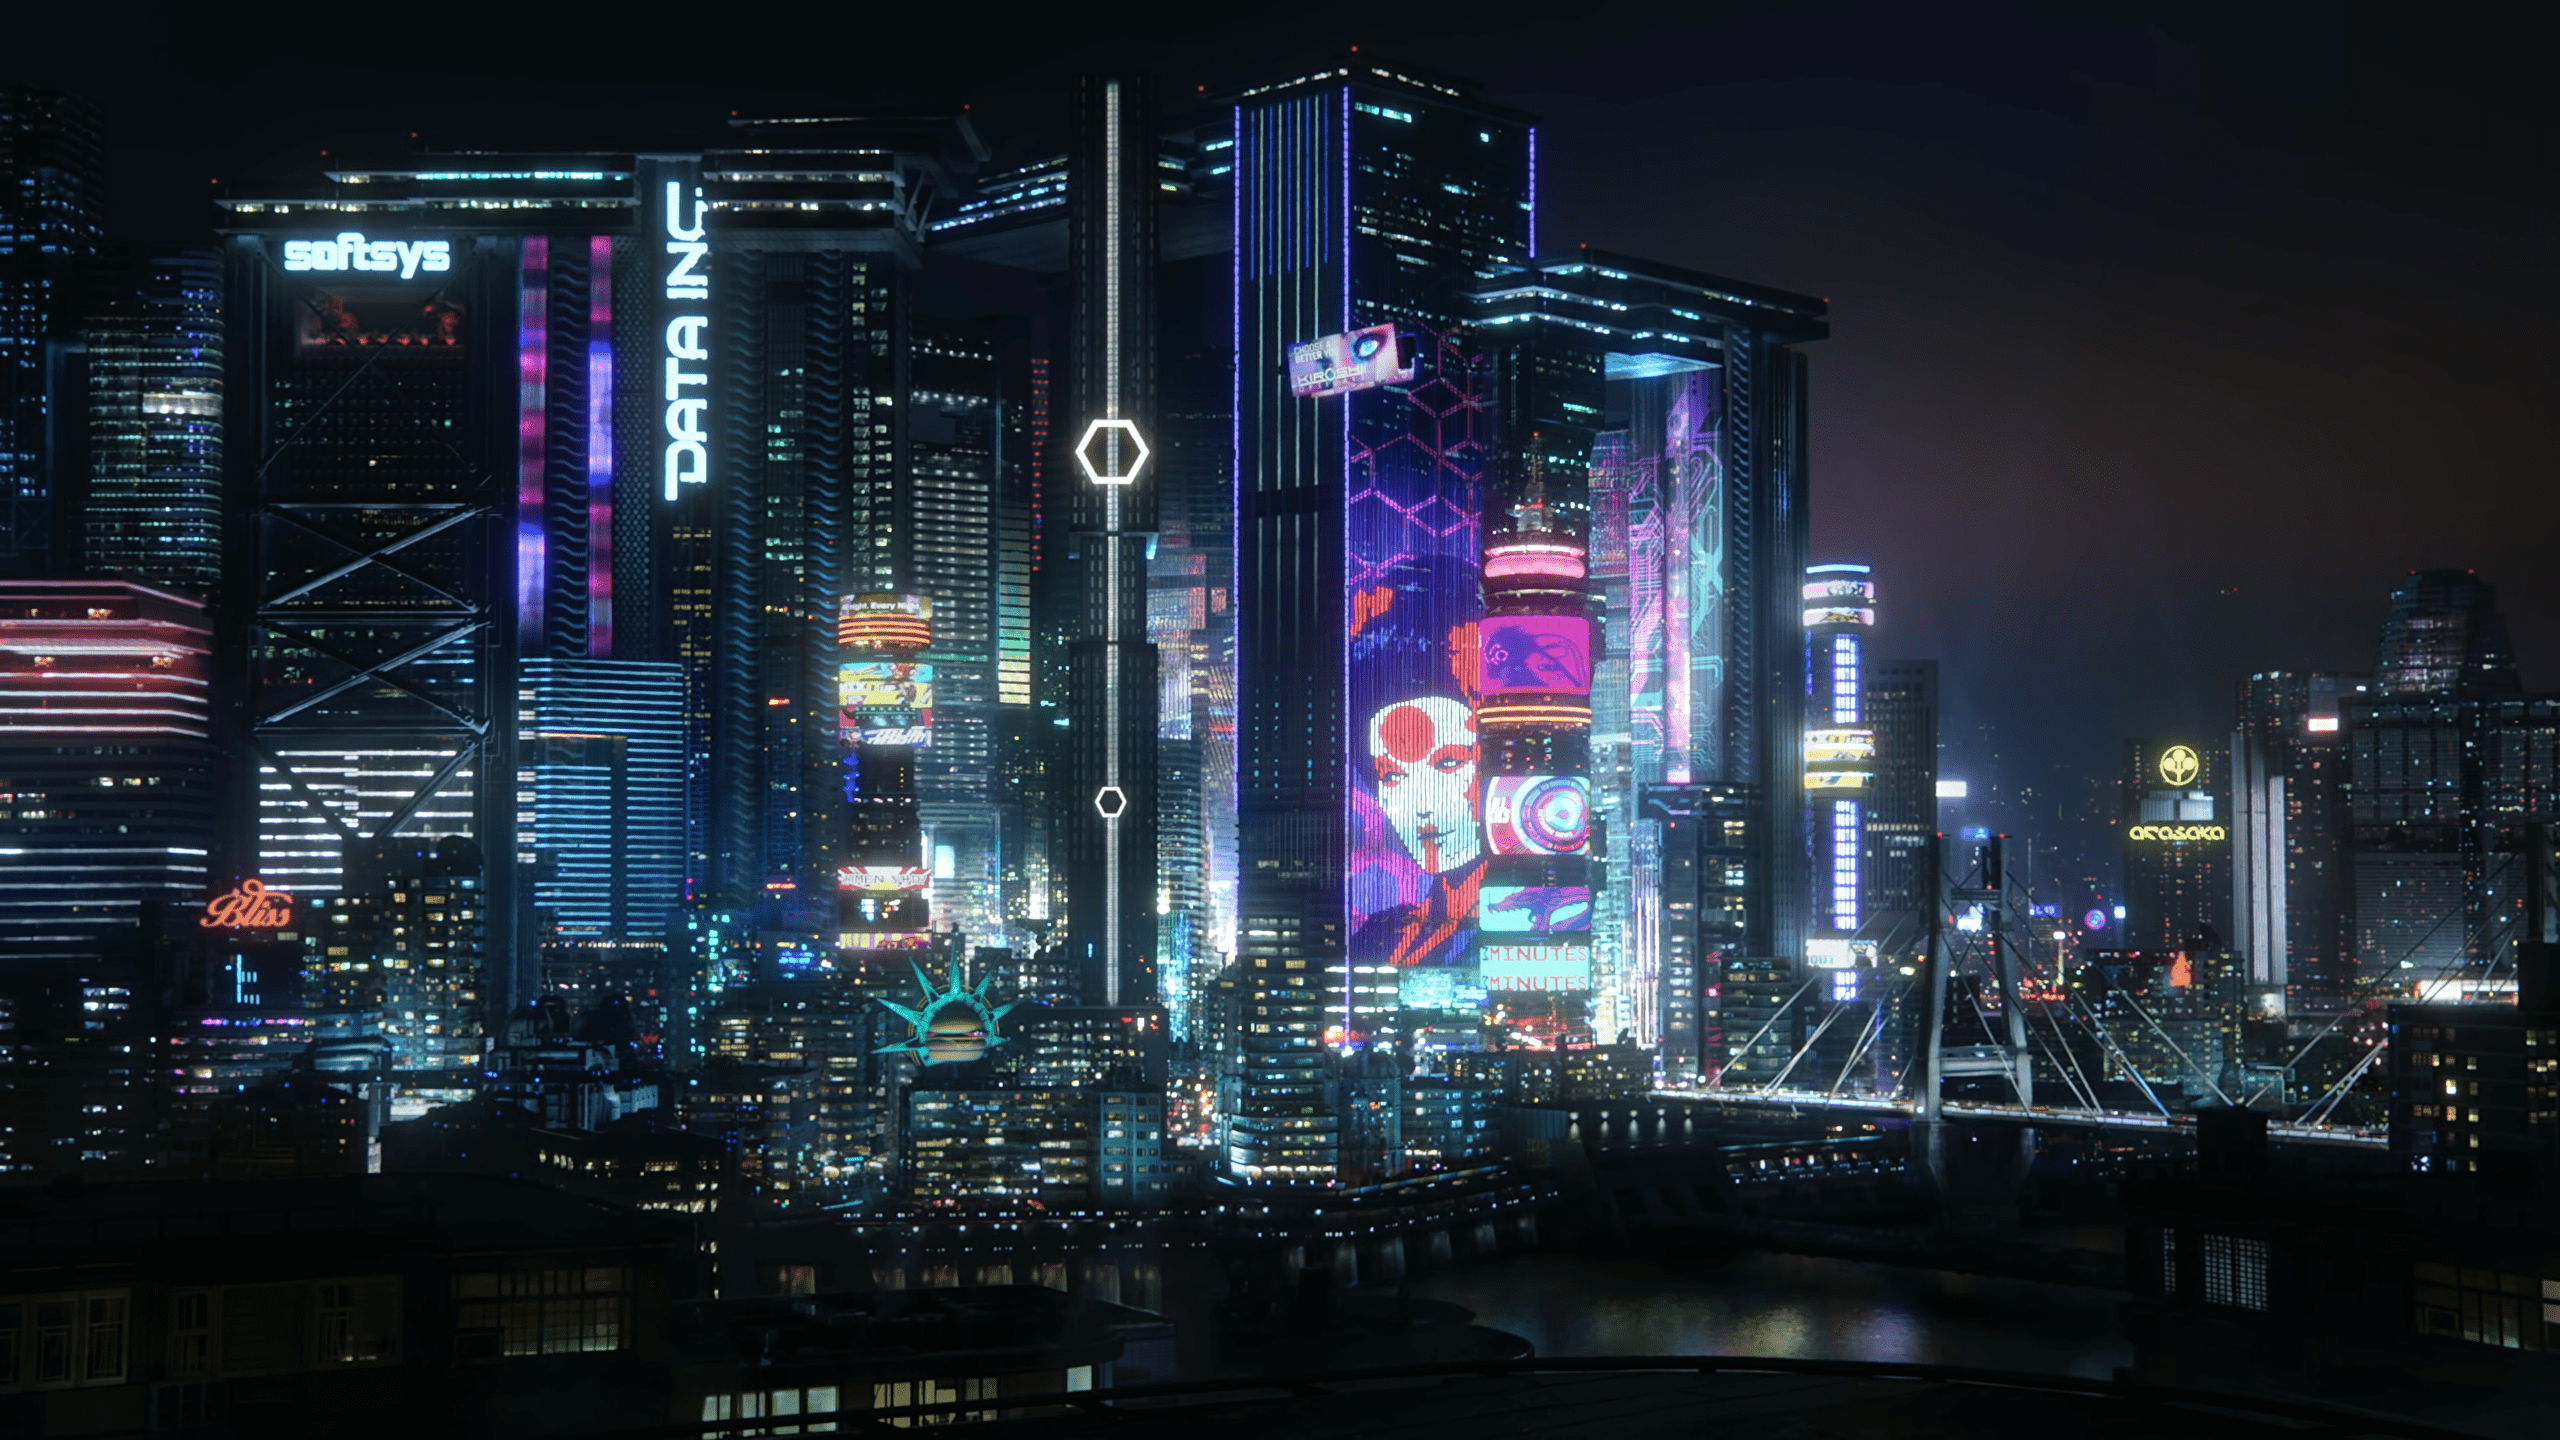 City wallpapers 4k uhd 16:9, desktop backgrounds hd, pictures and images